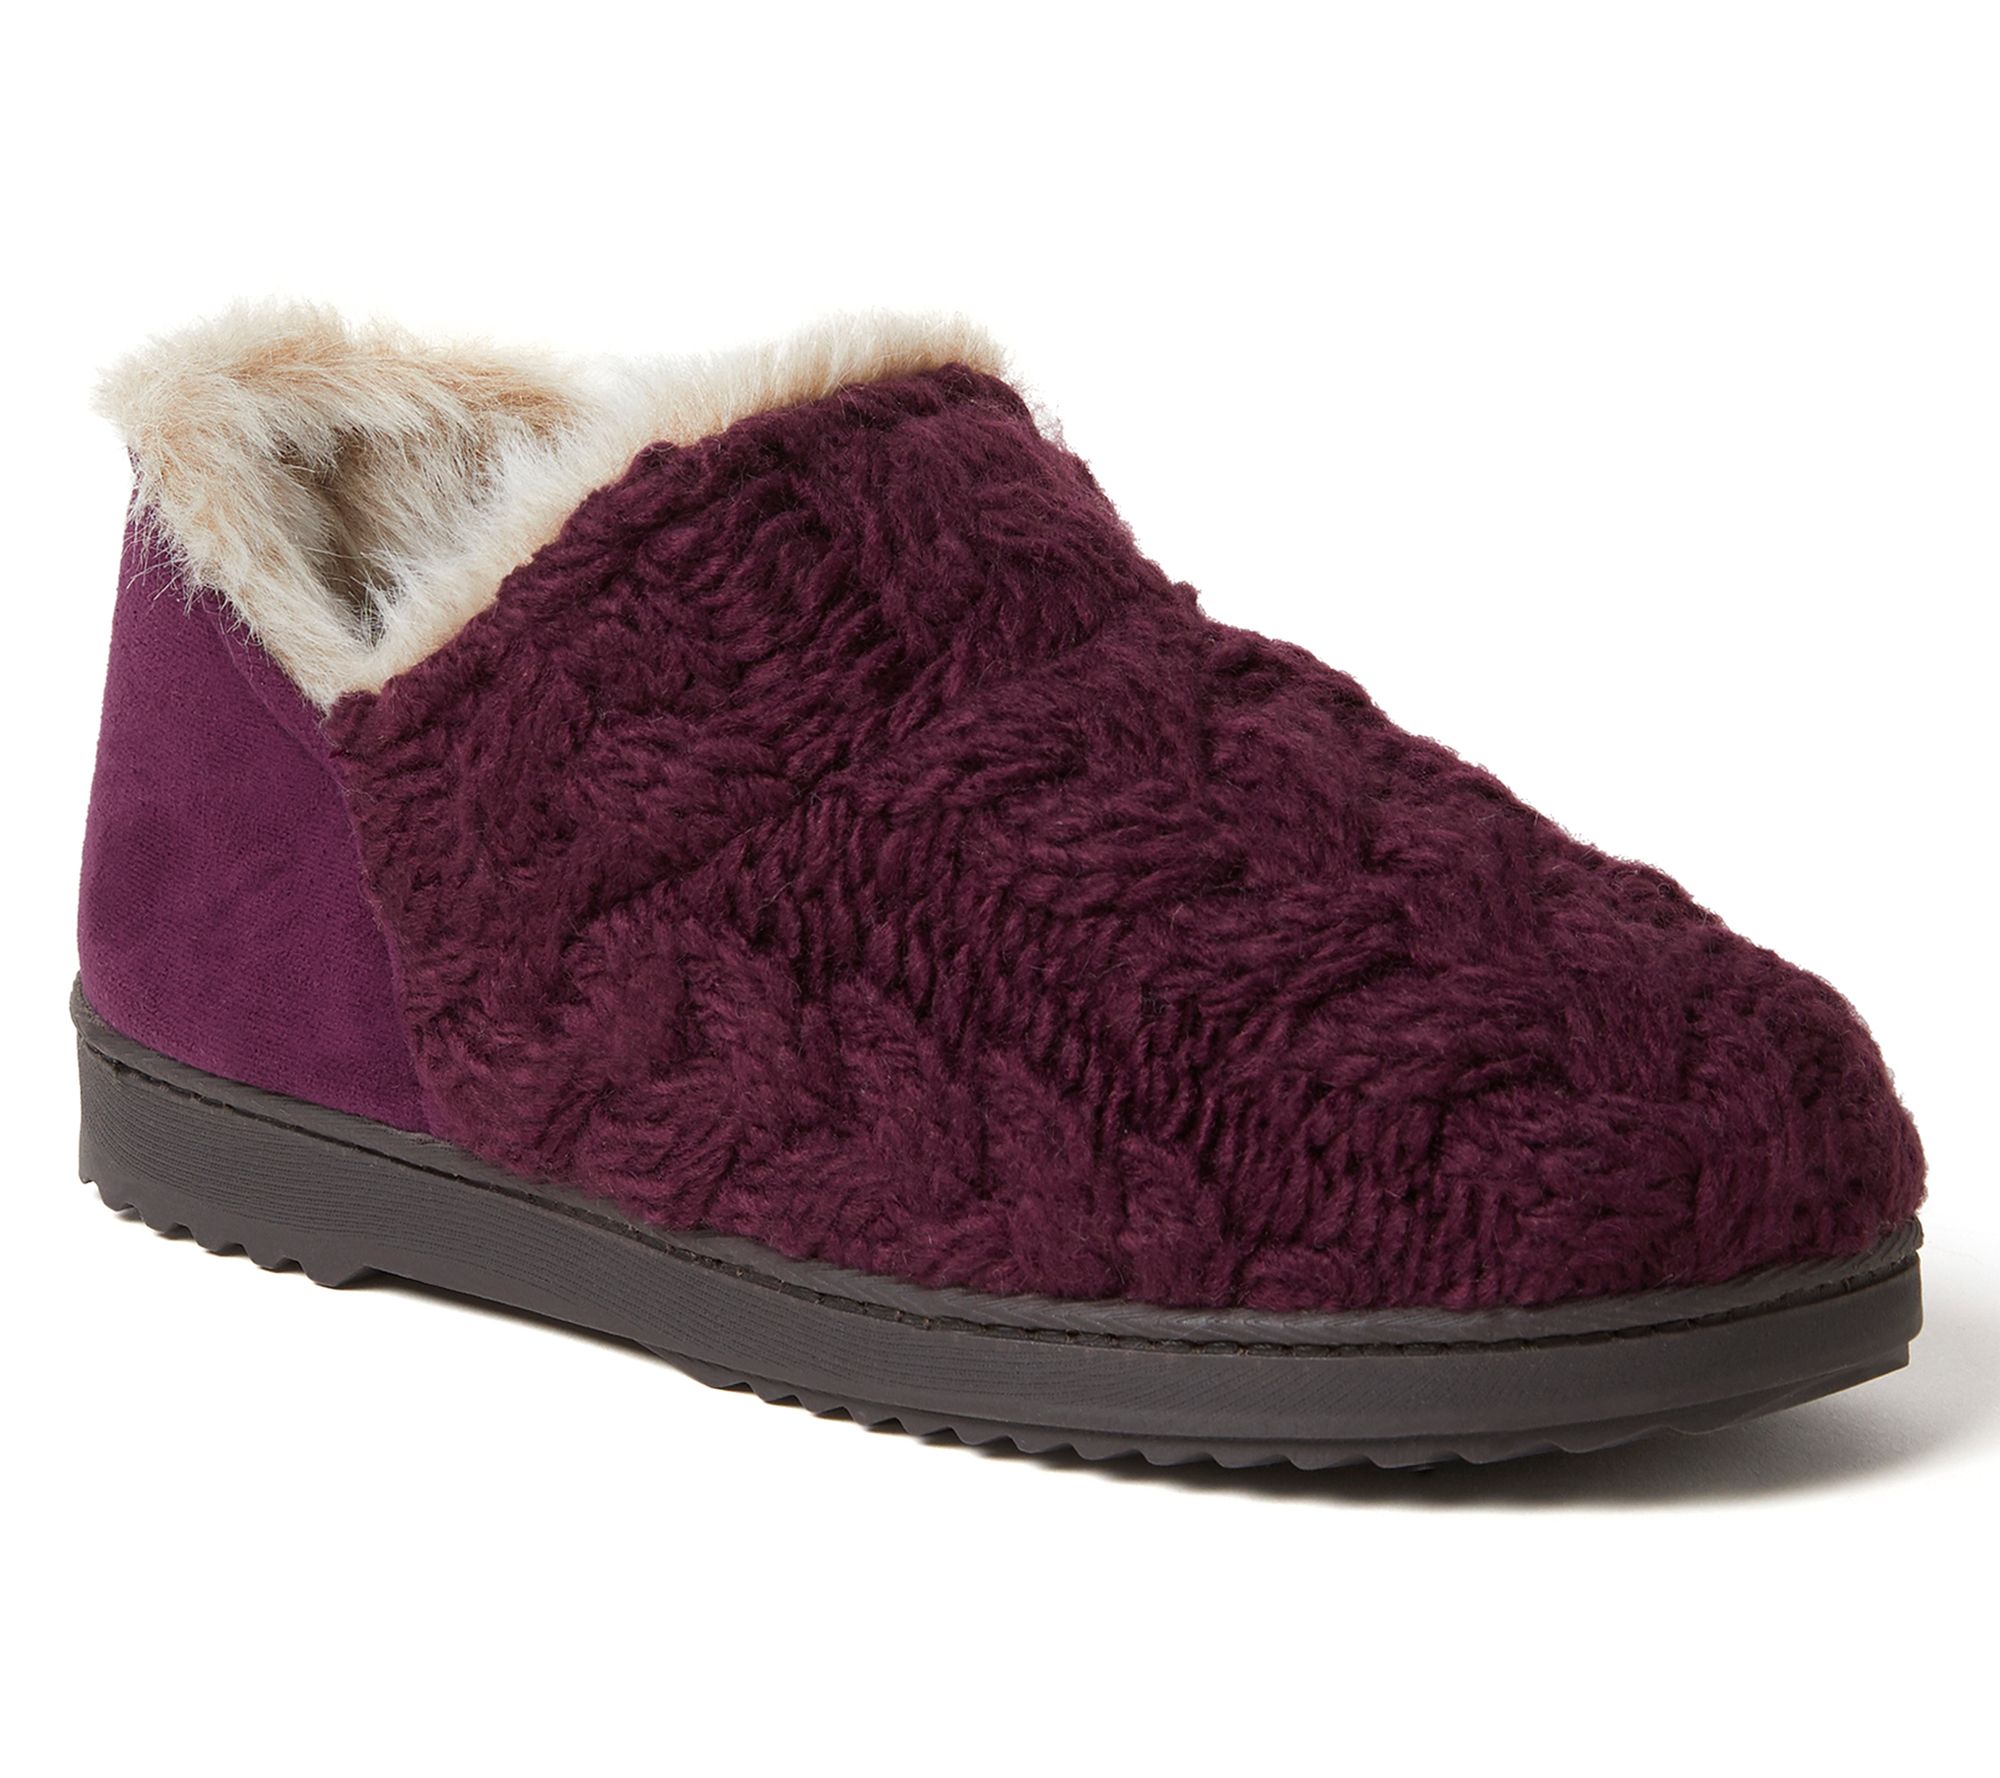 Dearfoams Chunky Cable Knit Bootie Slippers - Hayden - QVC.com